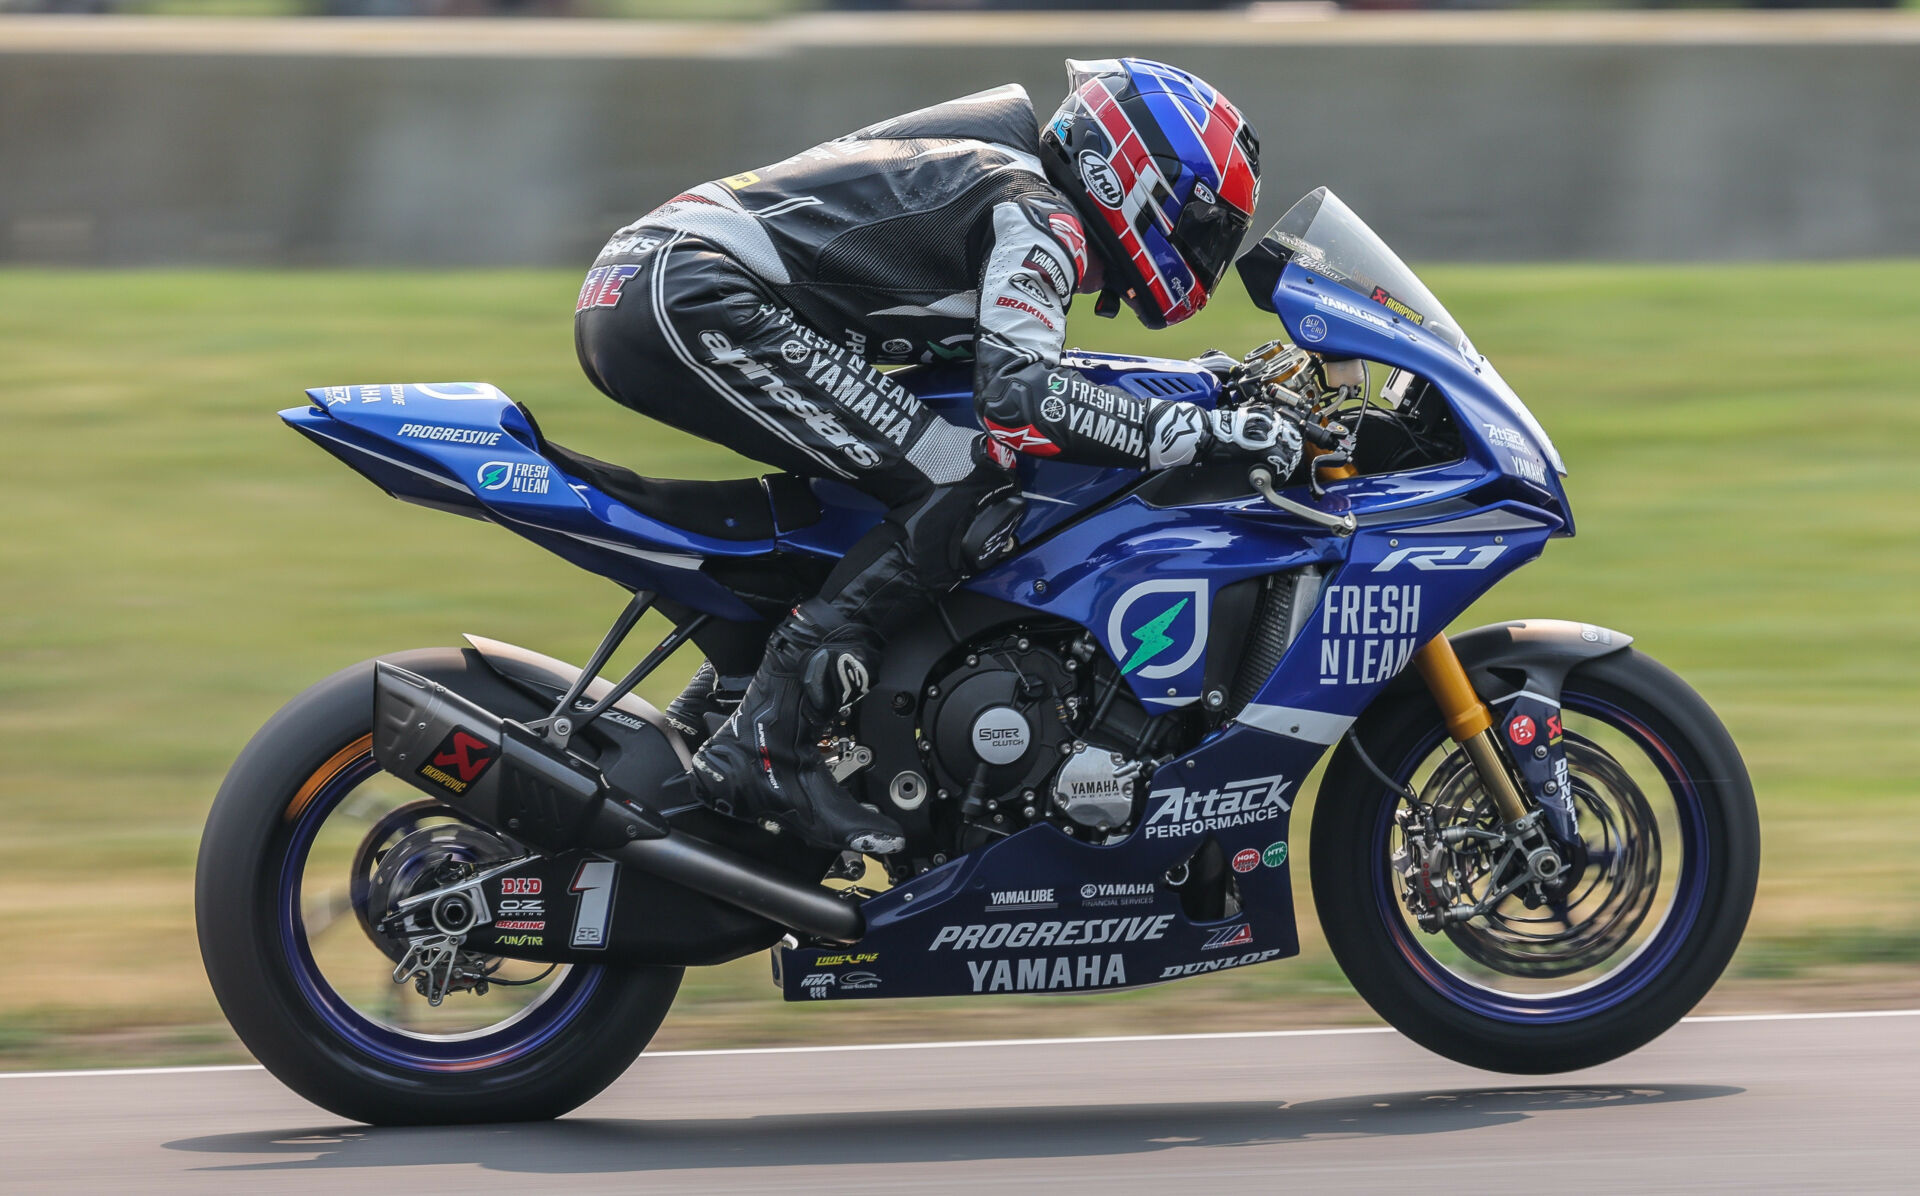 Jake Gagne (1) will be trying to extend his win streak at Ridge Motorsports Park this coming weekend. The defending MotoAmerica Medallia Superbike Champion has won the past four races in Washington State. Photo by Brian J. Nelson.